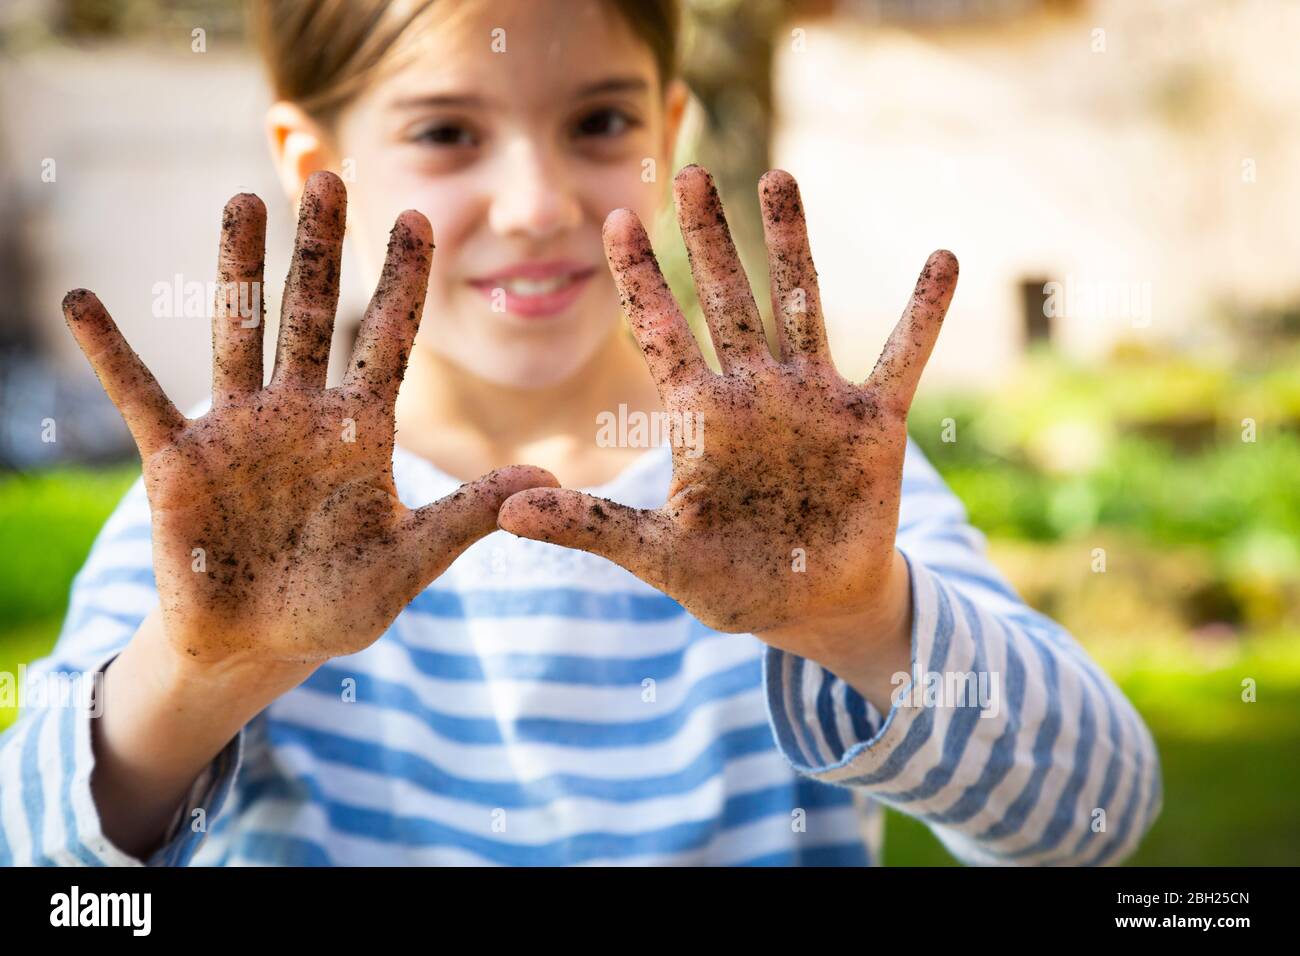 Portrait of smiling girl showing her dirty hands Stock Photo